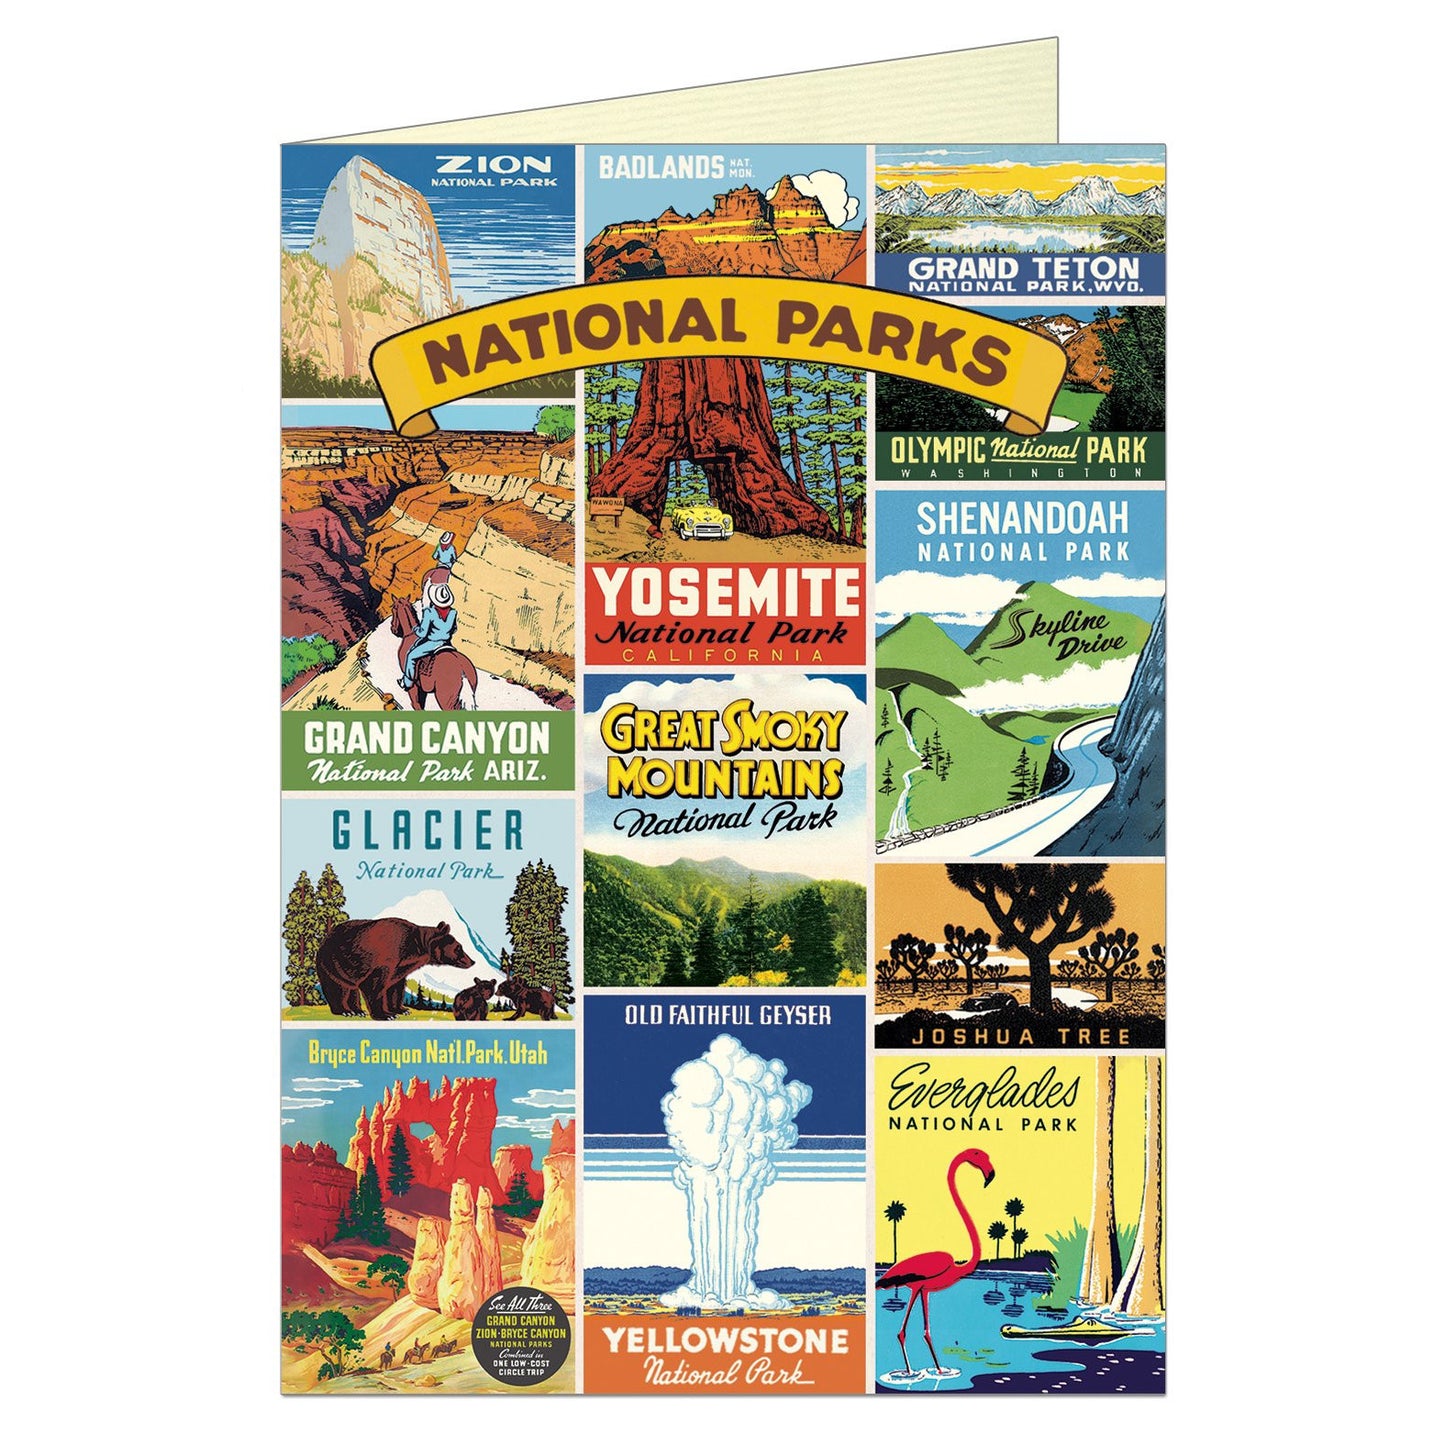 Cavallini & Co. Greeting Card - National Parks